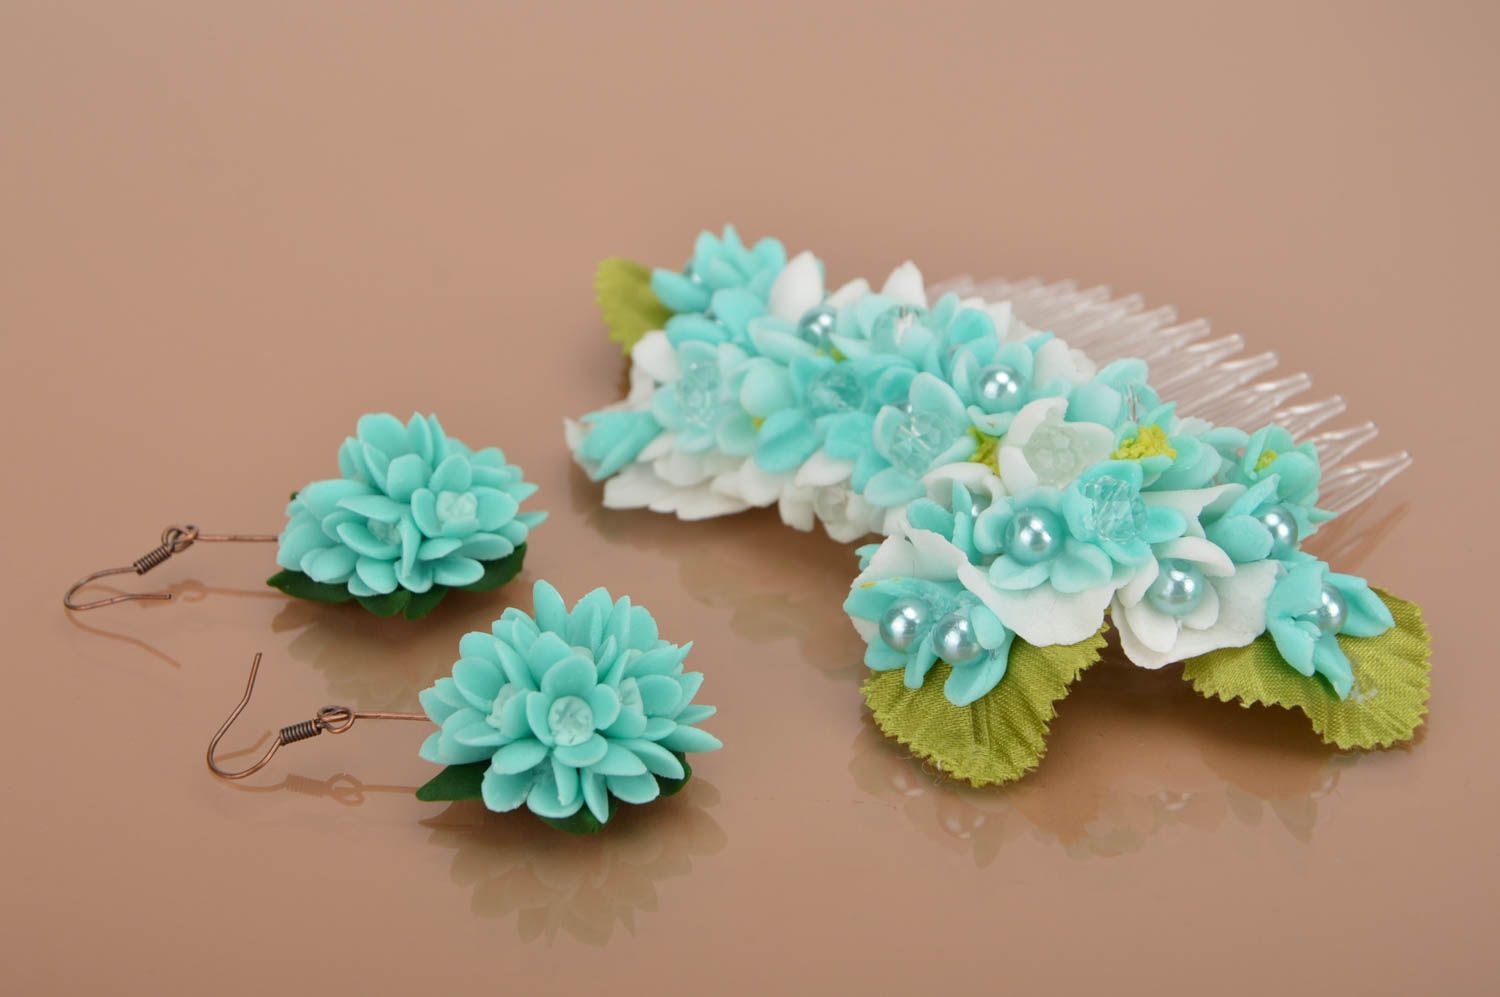 Set of handmade polymer clay floral accessories 2 items earrings and hair comb photo 2